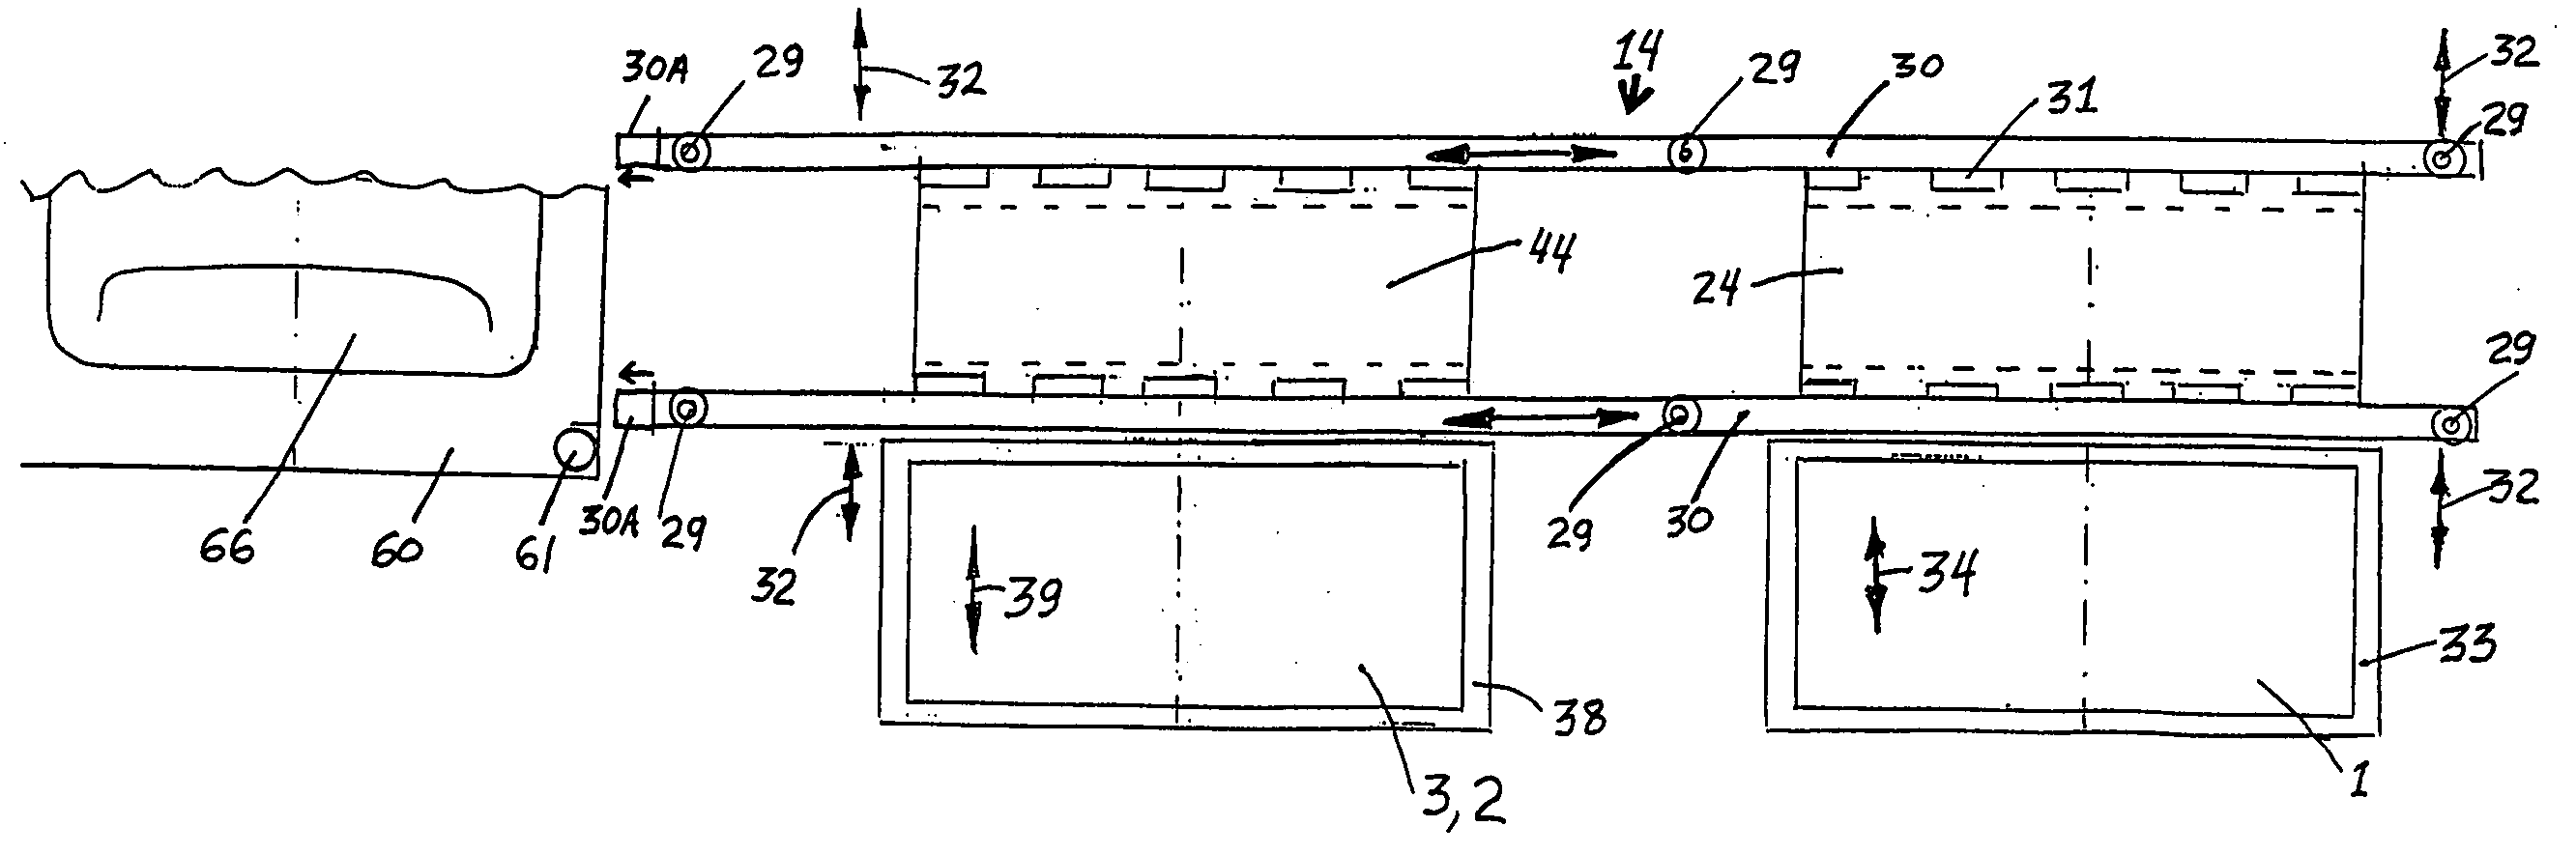 Method and apparatus for producing a three-dimensionally molded, laminated article with transfer-printed surface decoration